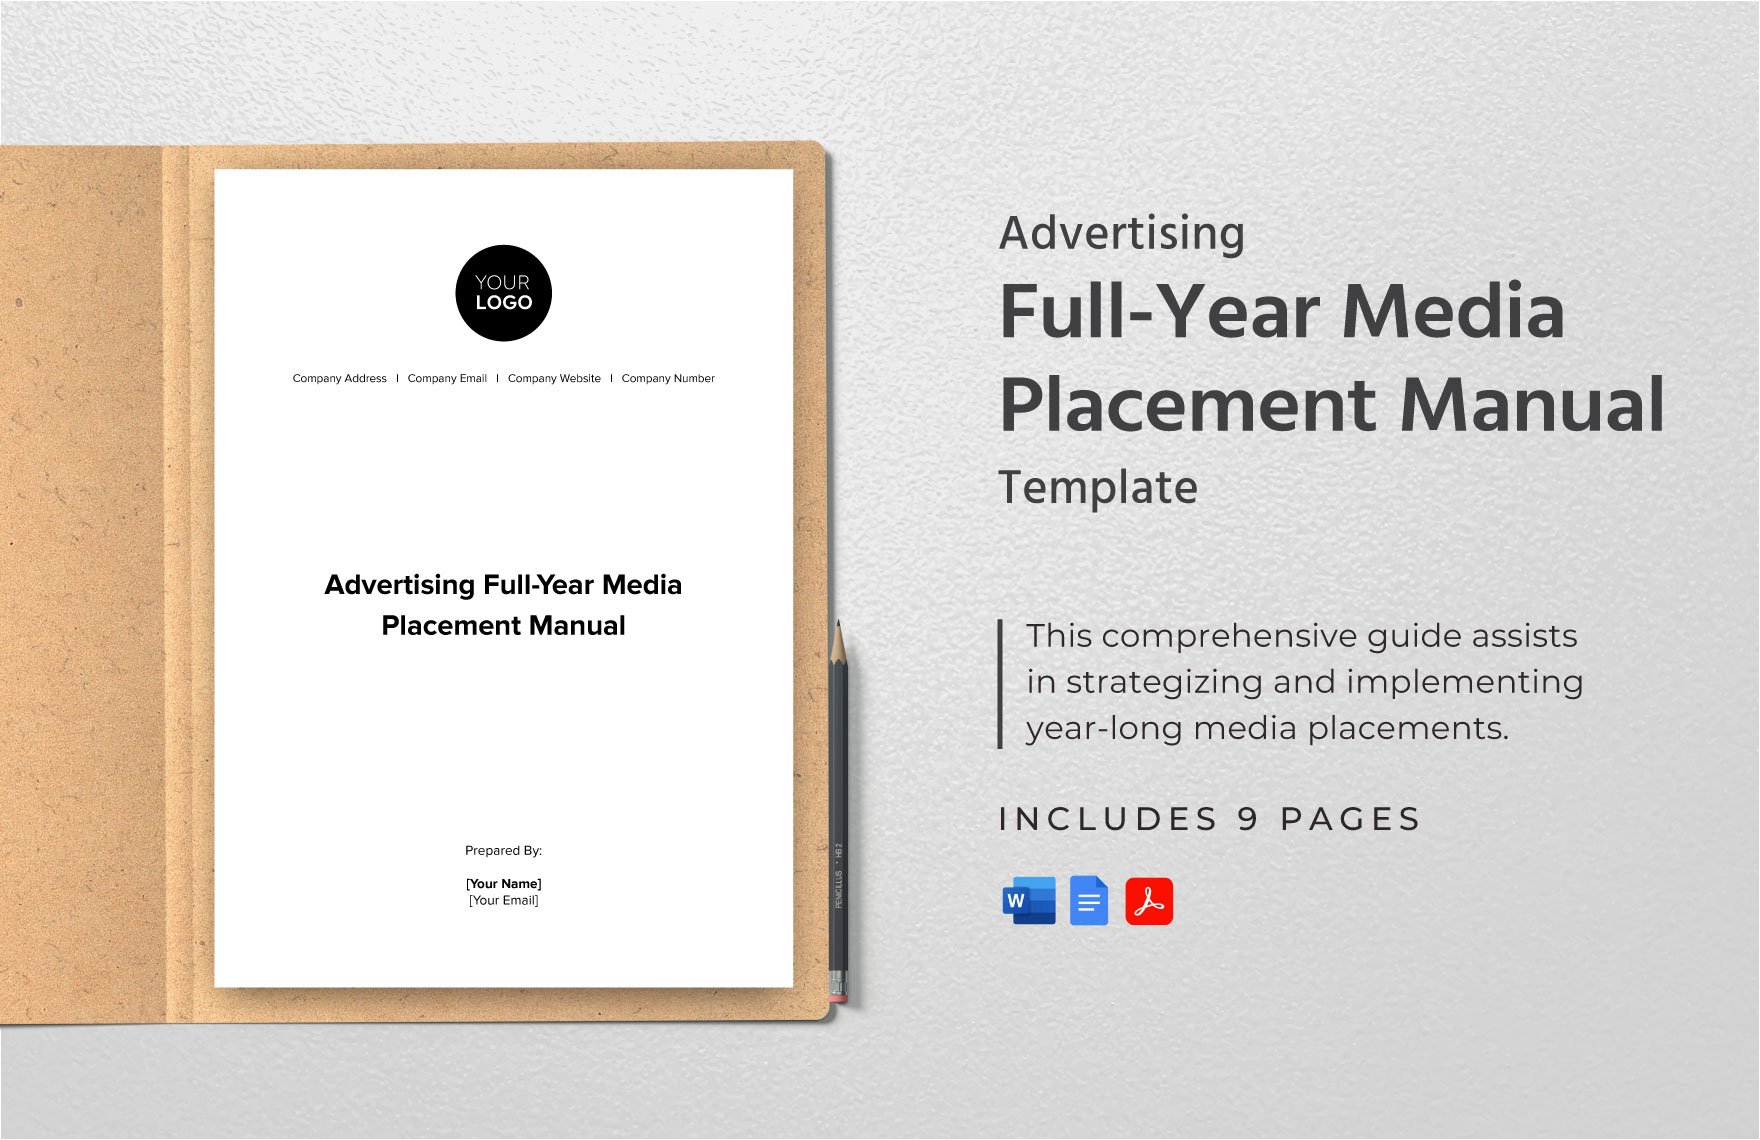 Advertising Full-Year Media Placement Manual Template in Word, Google Docs, PDF